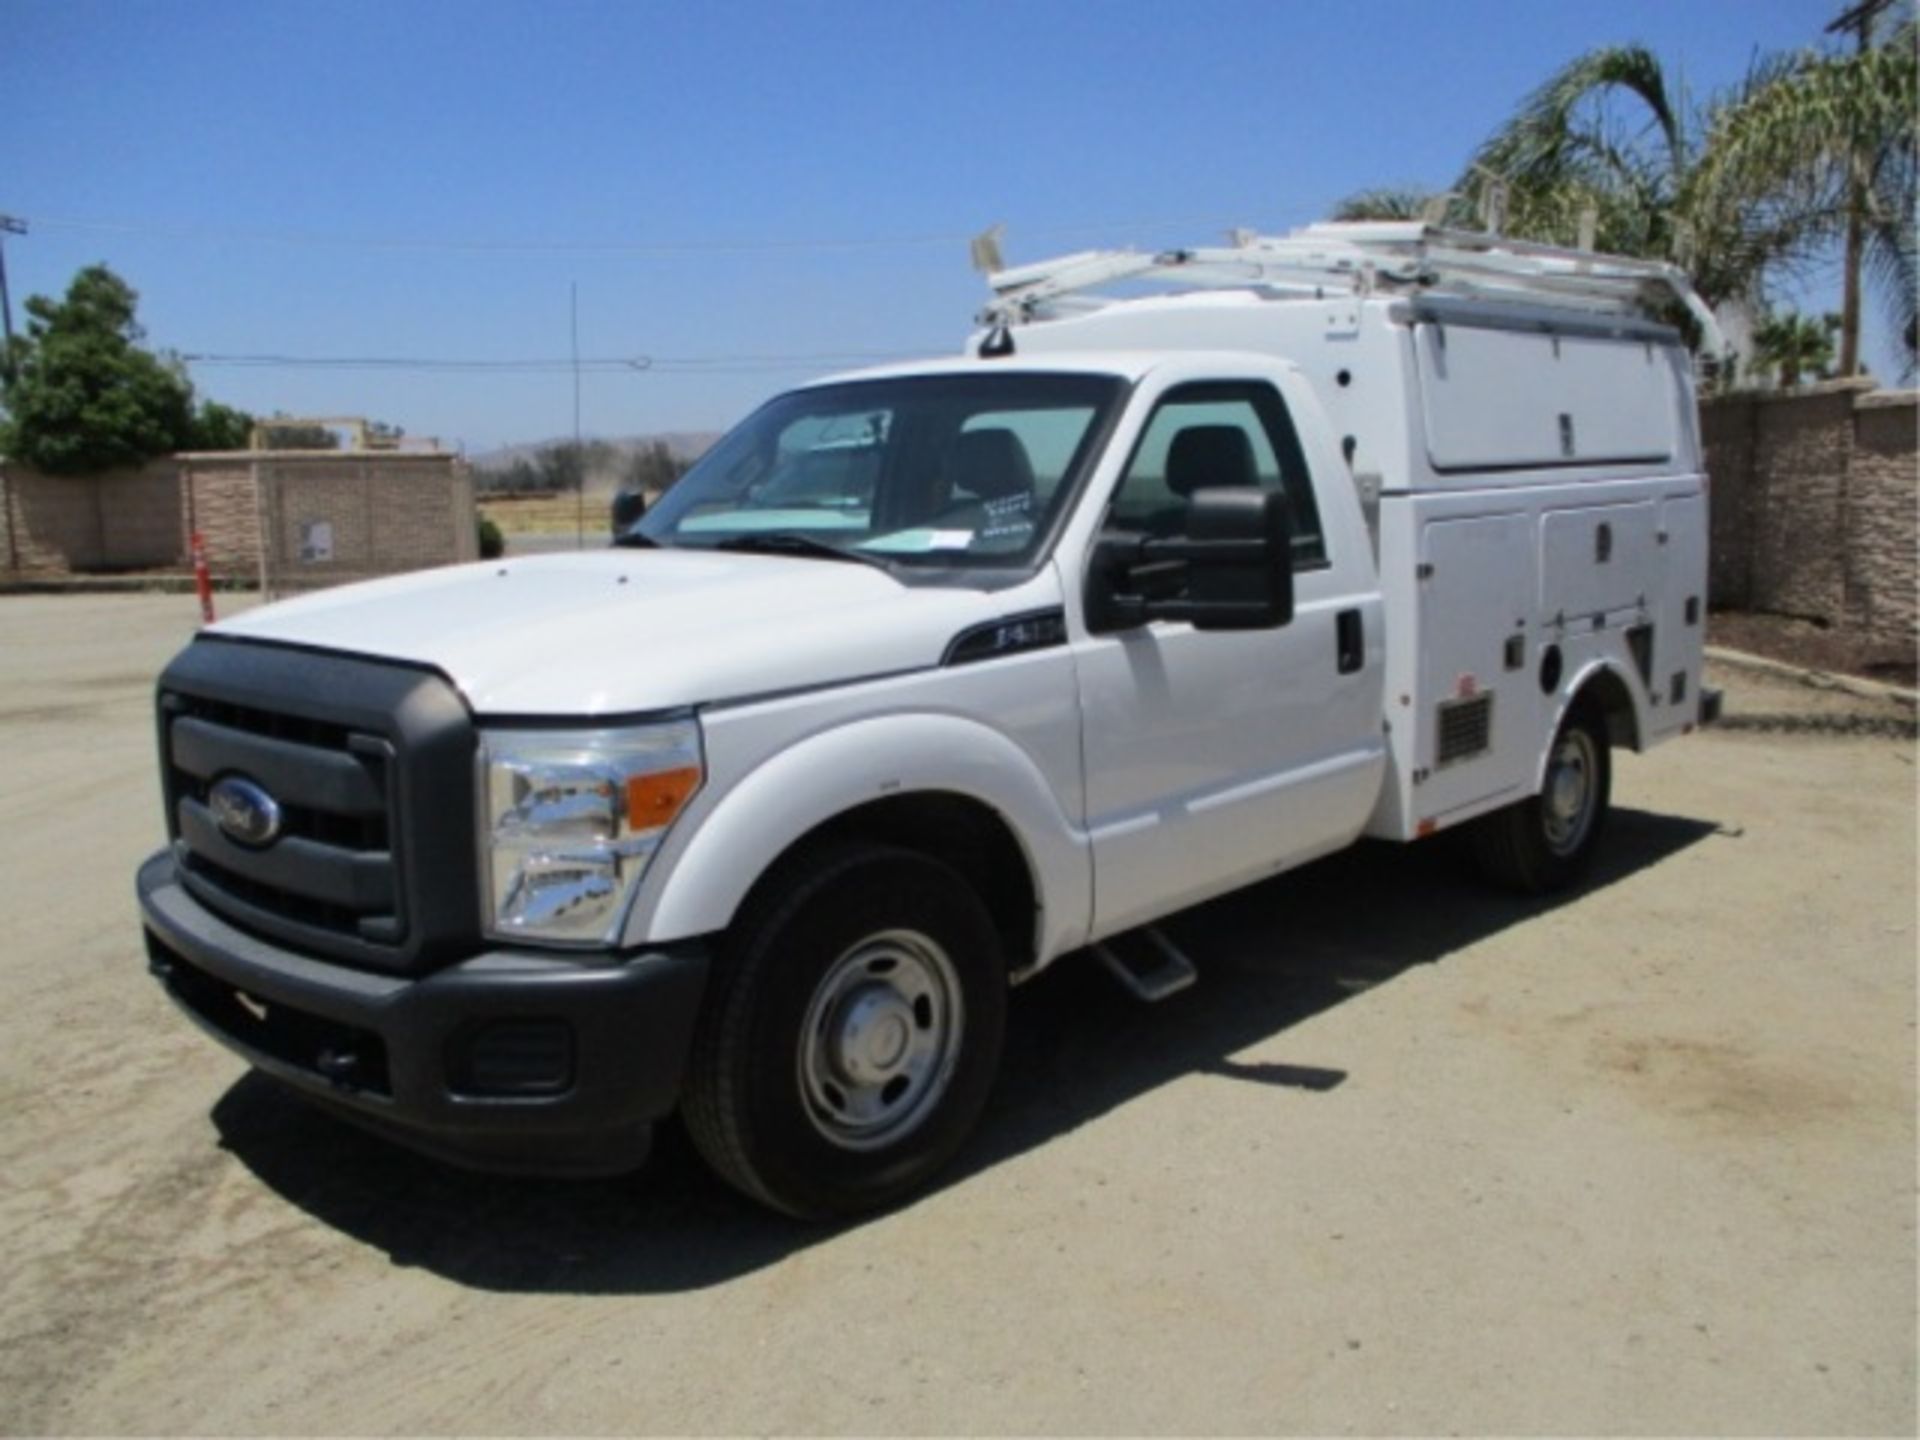 2013 Ford F350 SD Utility Truck, 6.2L V8 Gas, Automatic, Enclosed Utility Body, Onan Gas - Image 2 of 84